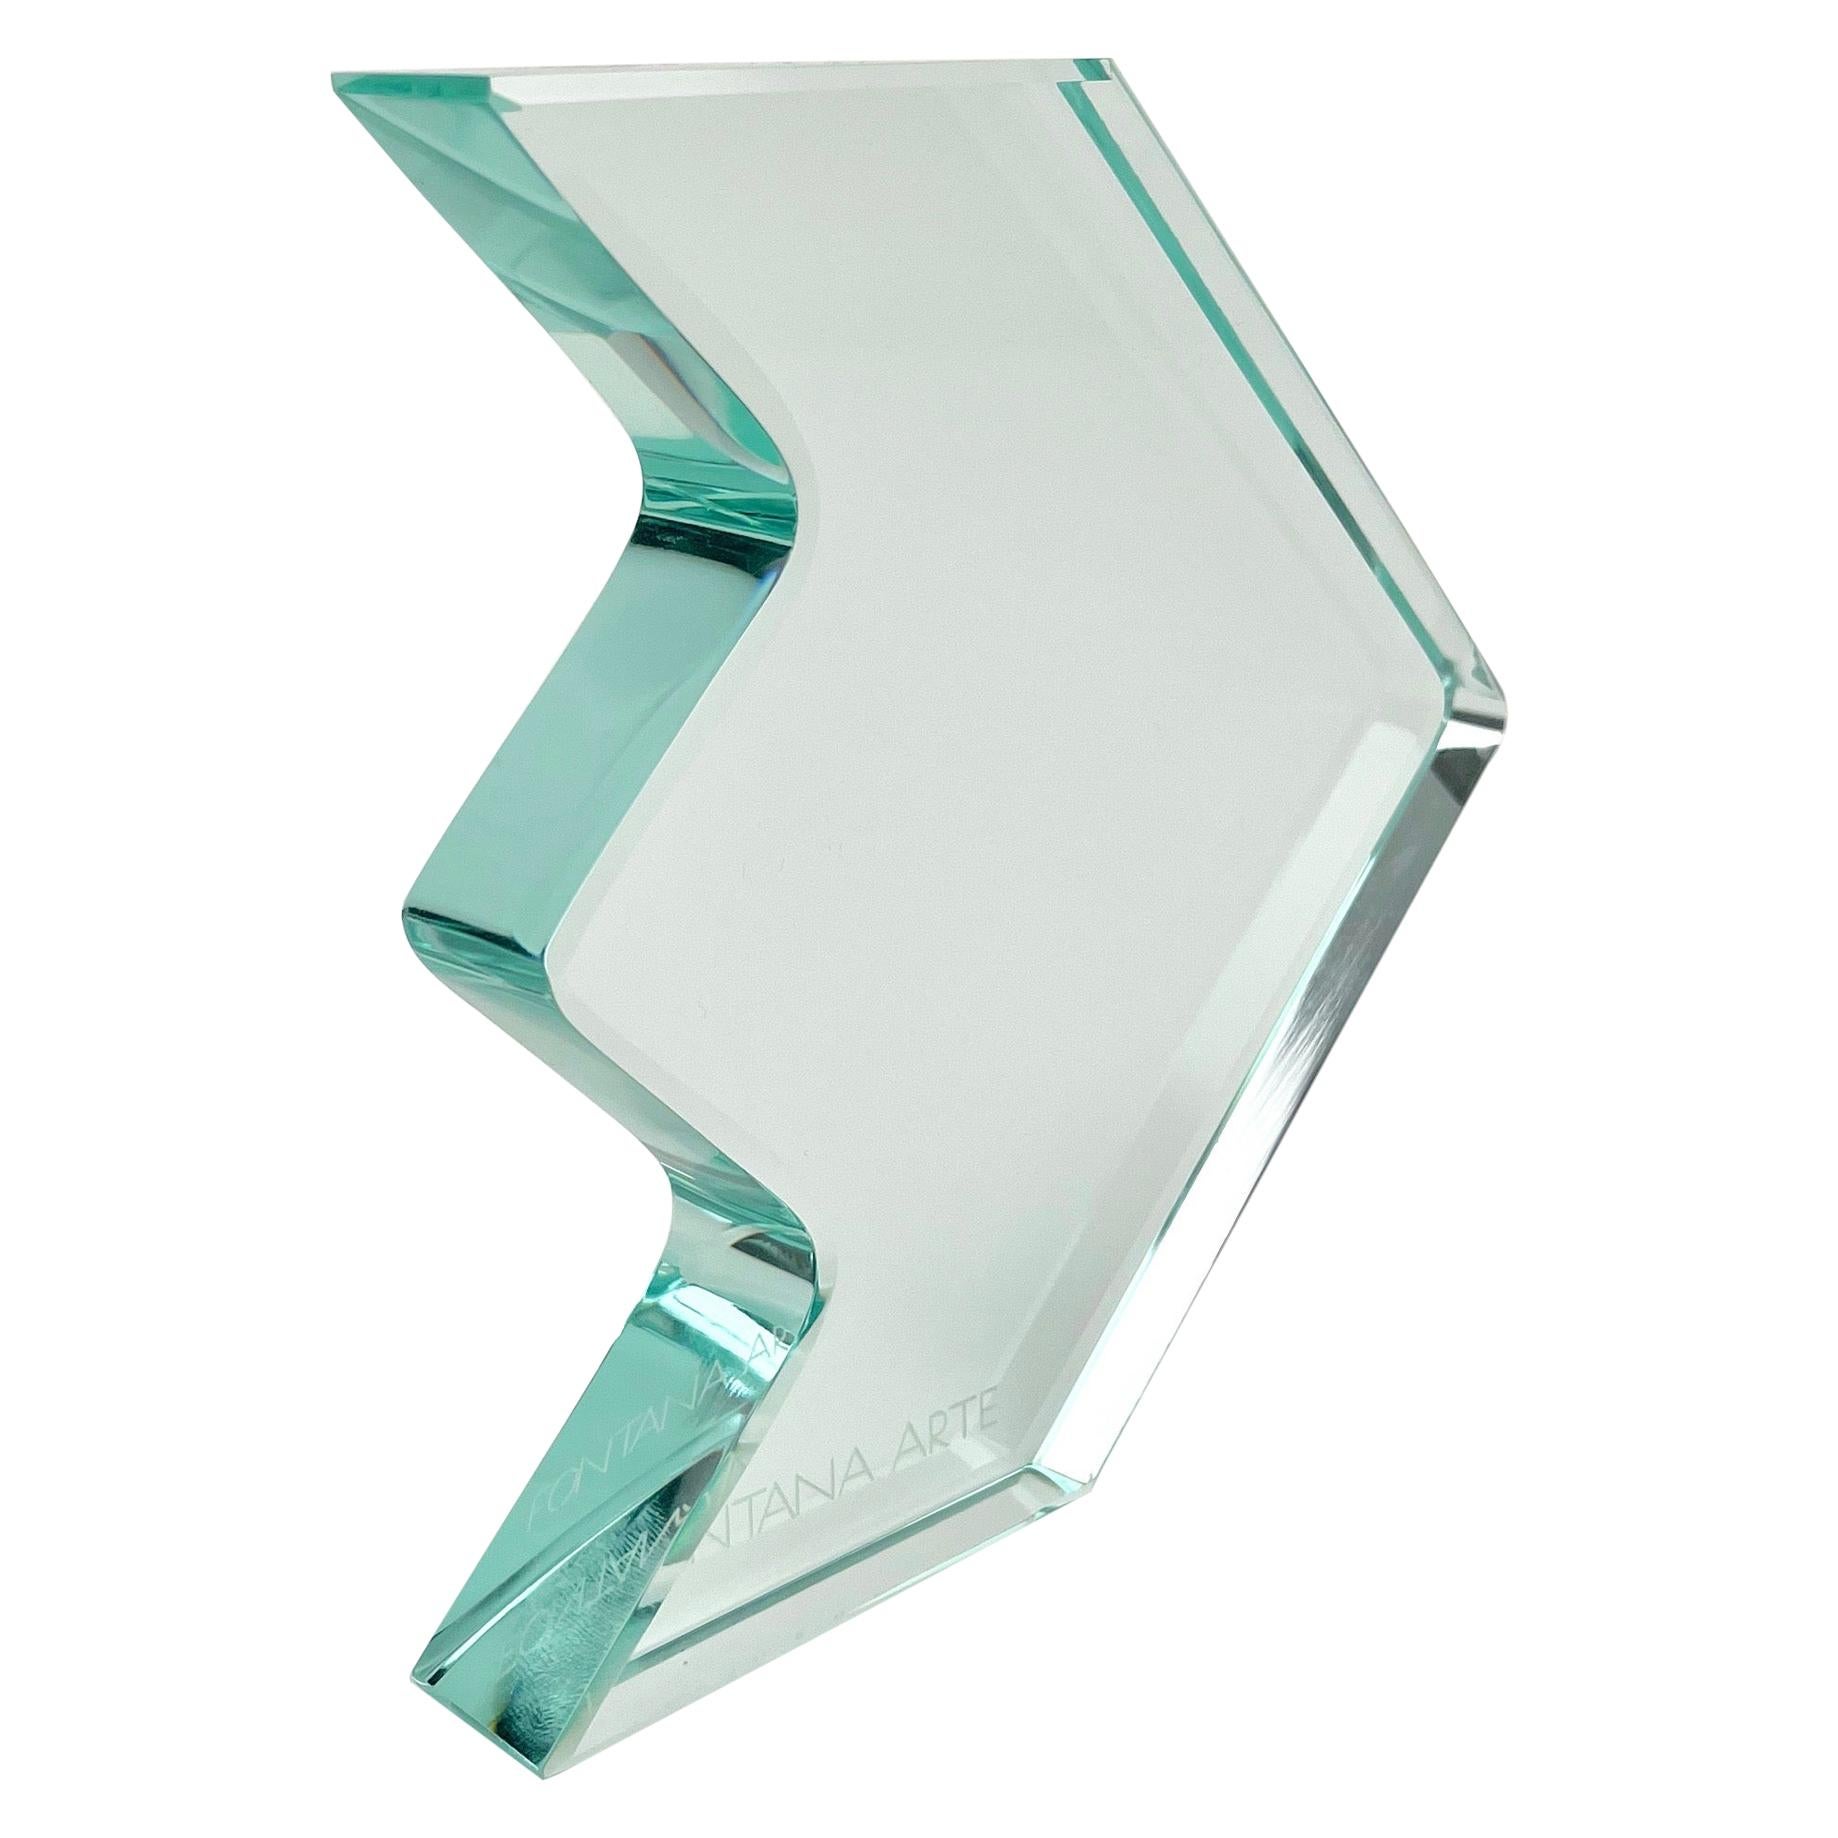 1970s Crystal Paperweight Sculpture by Fontana Arte for ISTUD, Italy